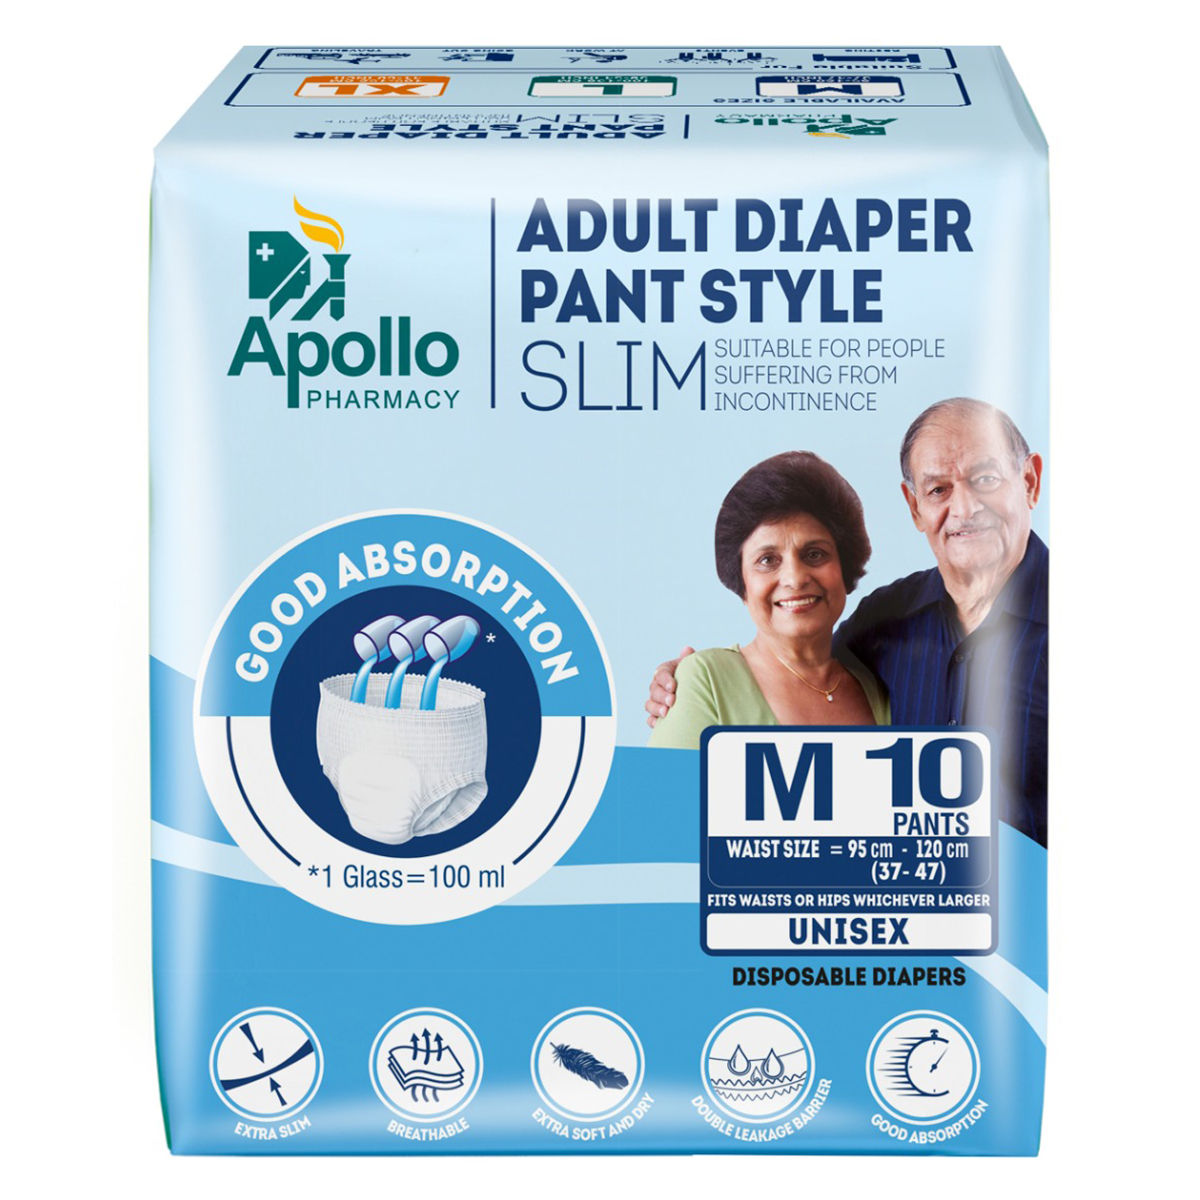 Respect Adult Diaper Pants Style for Unisex with Wetness Indicator, ADL and  Barrier Cuffs for Extra